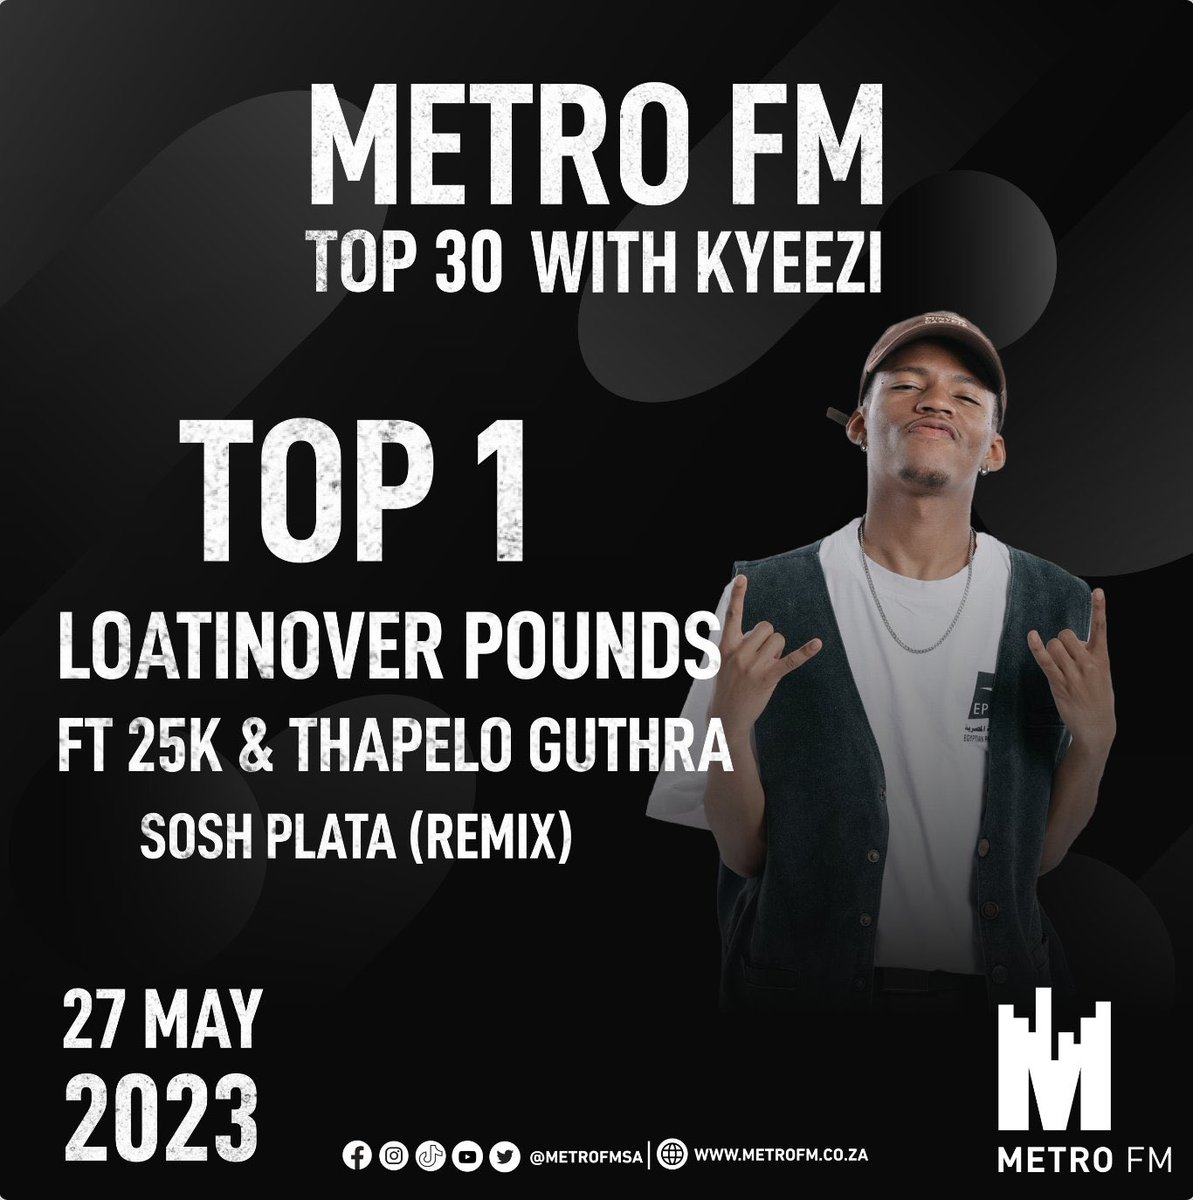 Sosh Plata Remix is the #1 song on this week's Metro FM top 30 chart.